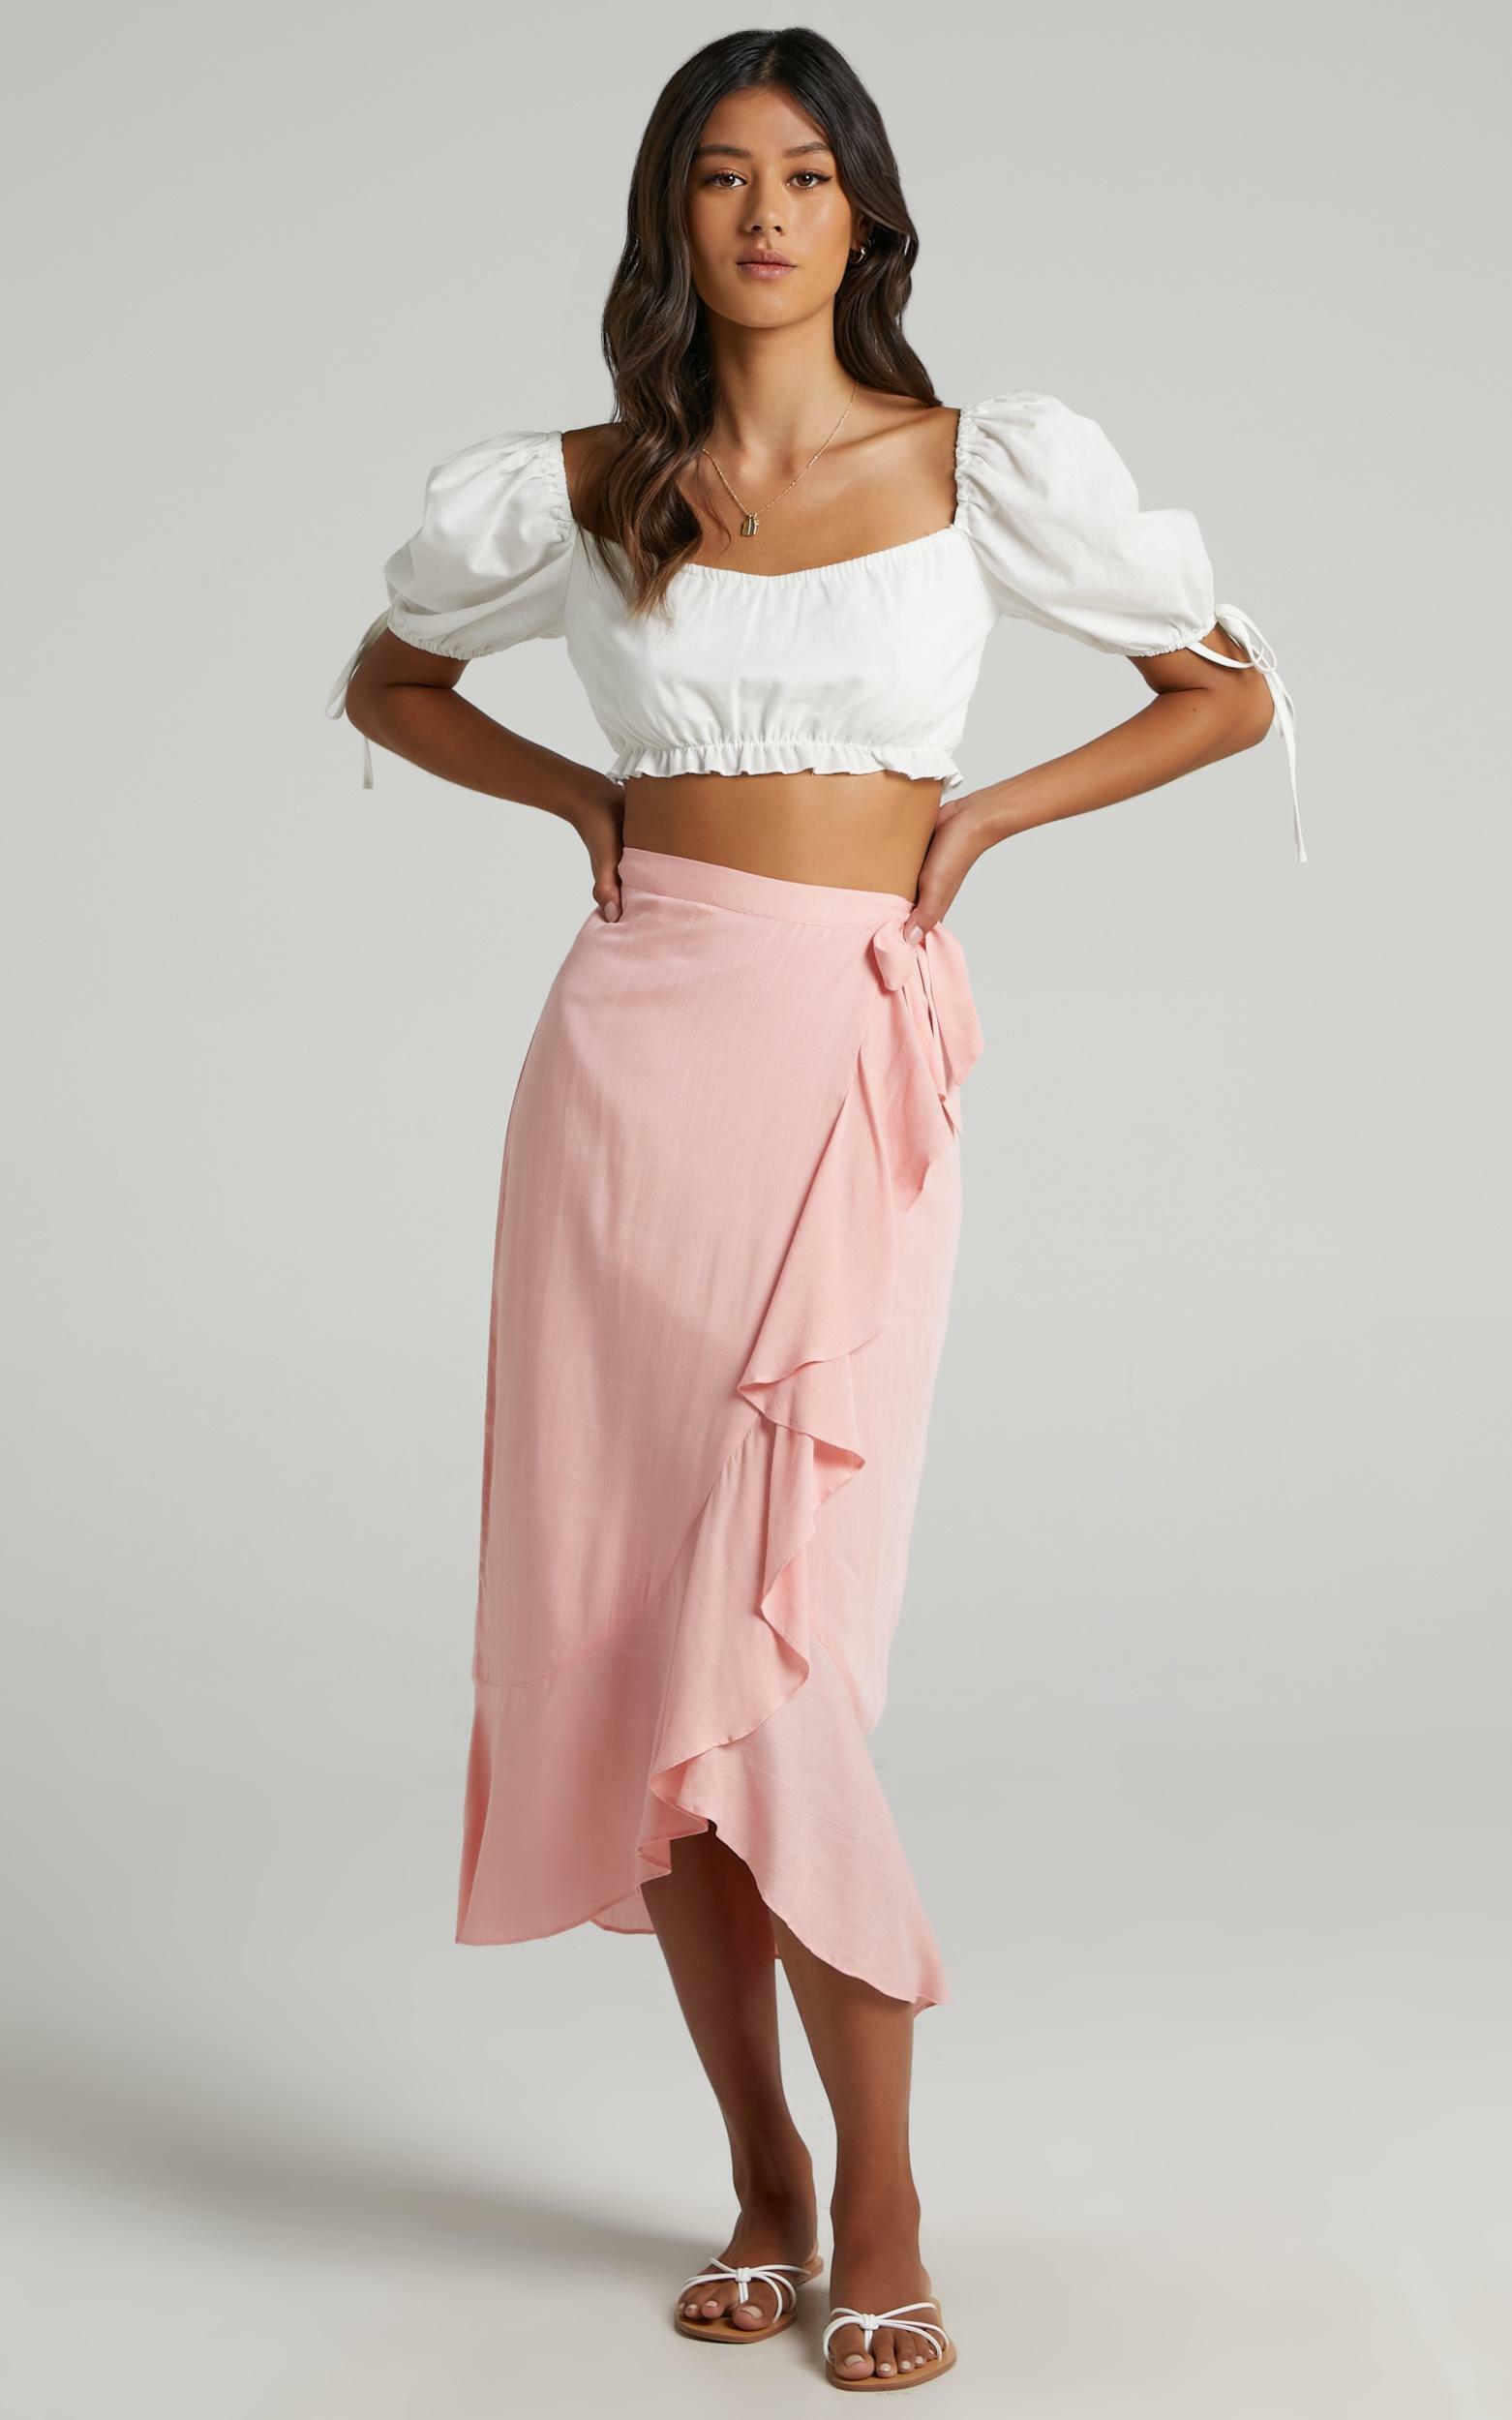 Camellia Skirt in Peach - 14 (XL), Pink, hi-res image number null